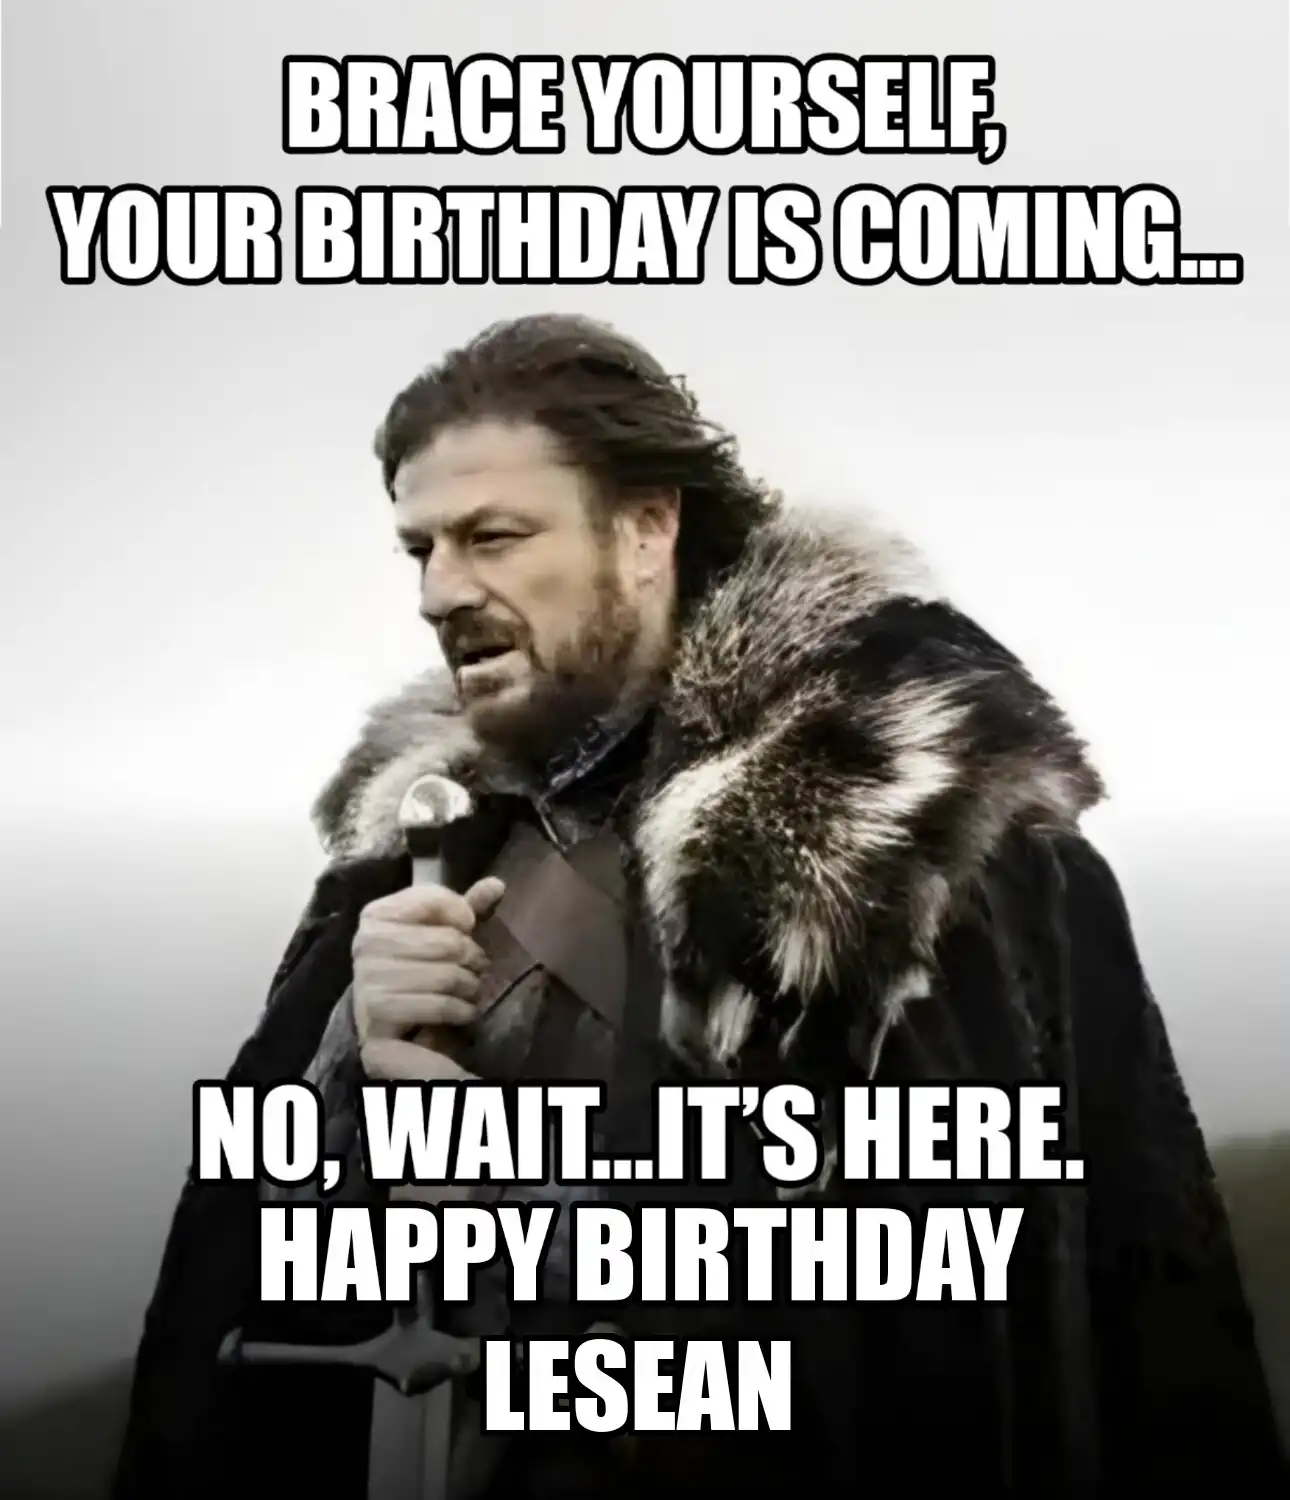 Happy Birthday Lesean Brace Yourself Your Birthday Is Coming Meme